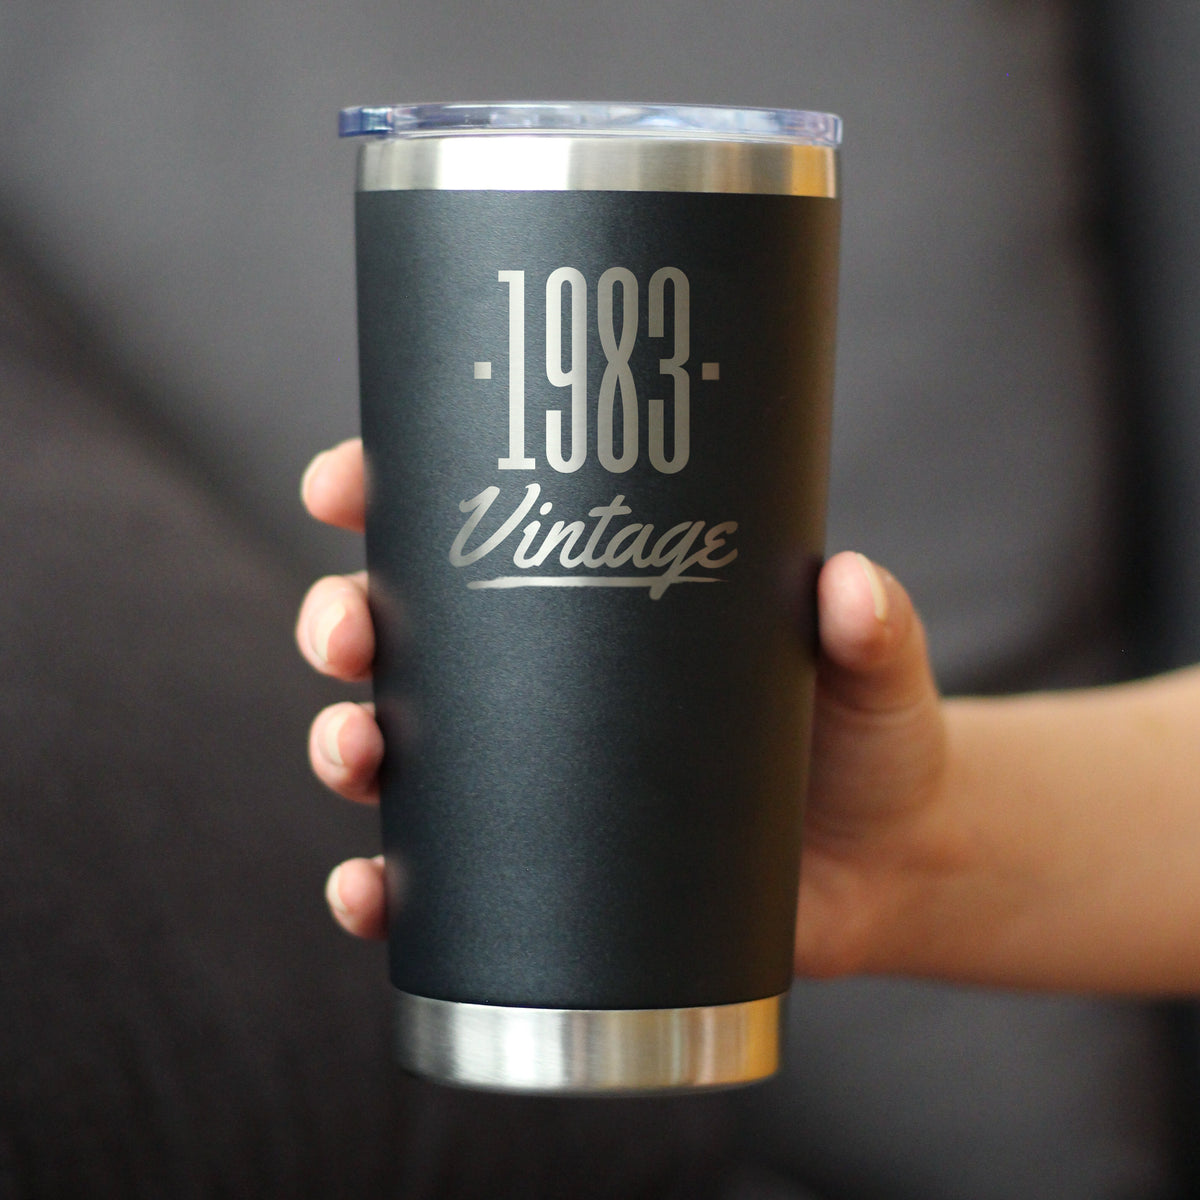 Vintage 1983 - Insulated Coffee Tumbler Cup with Sliding Lid - 20 oz - Funny 41st Birthday Gift for Women or Men Turning 41